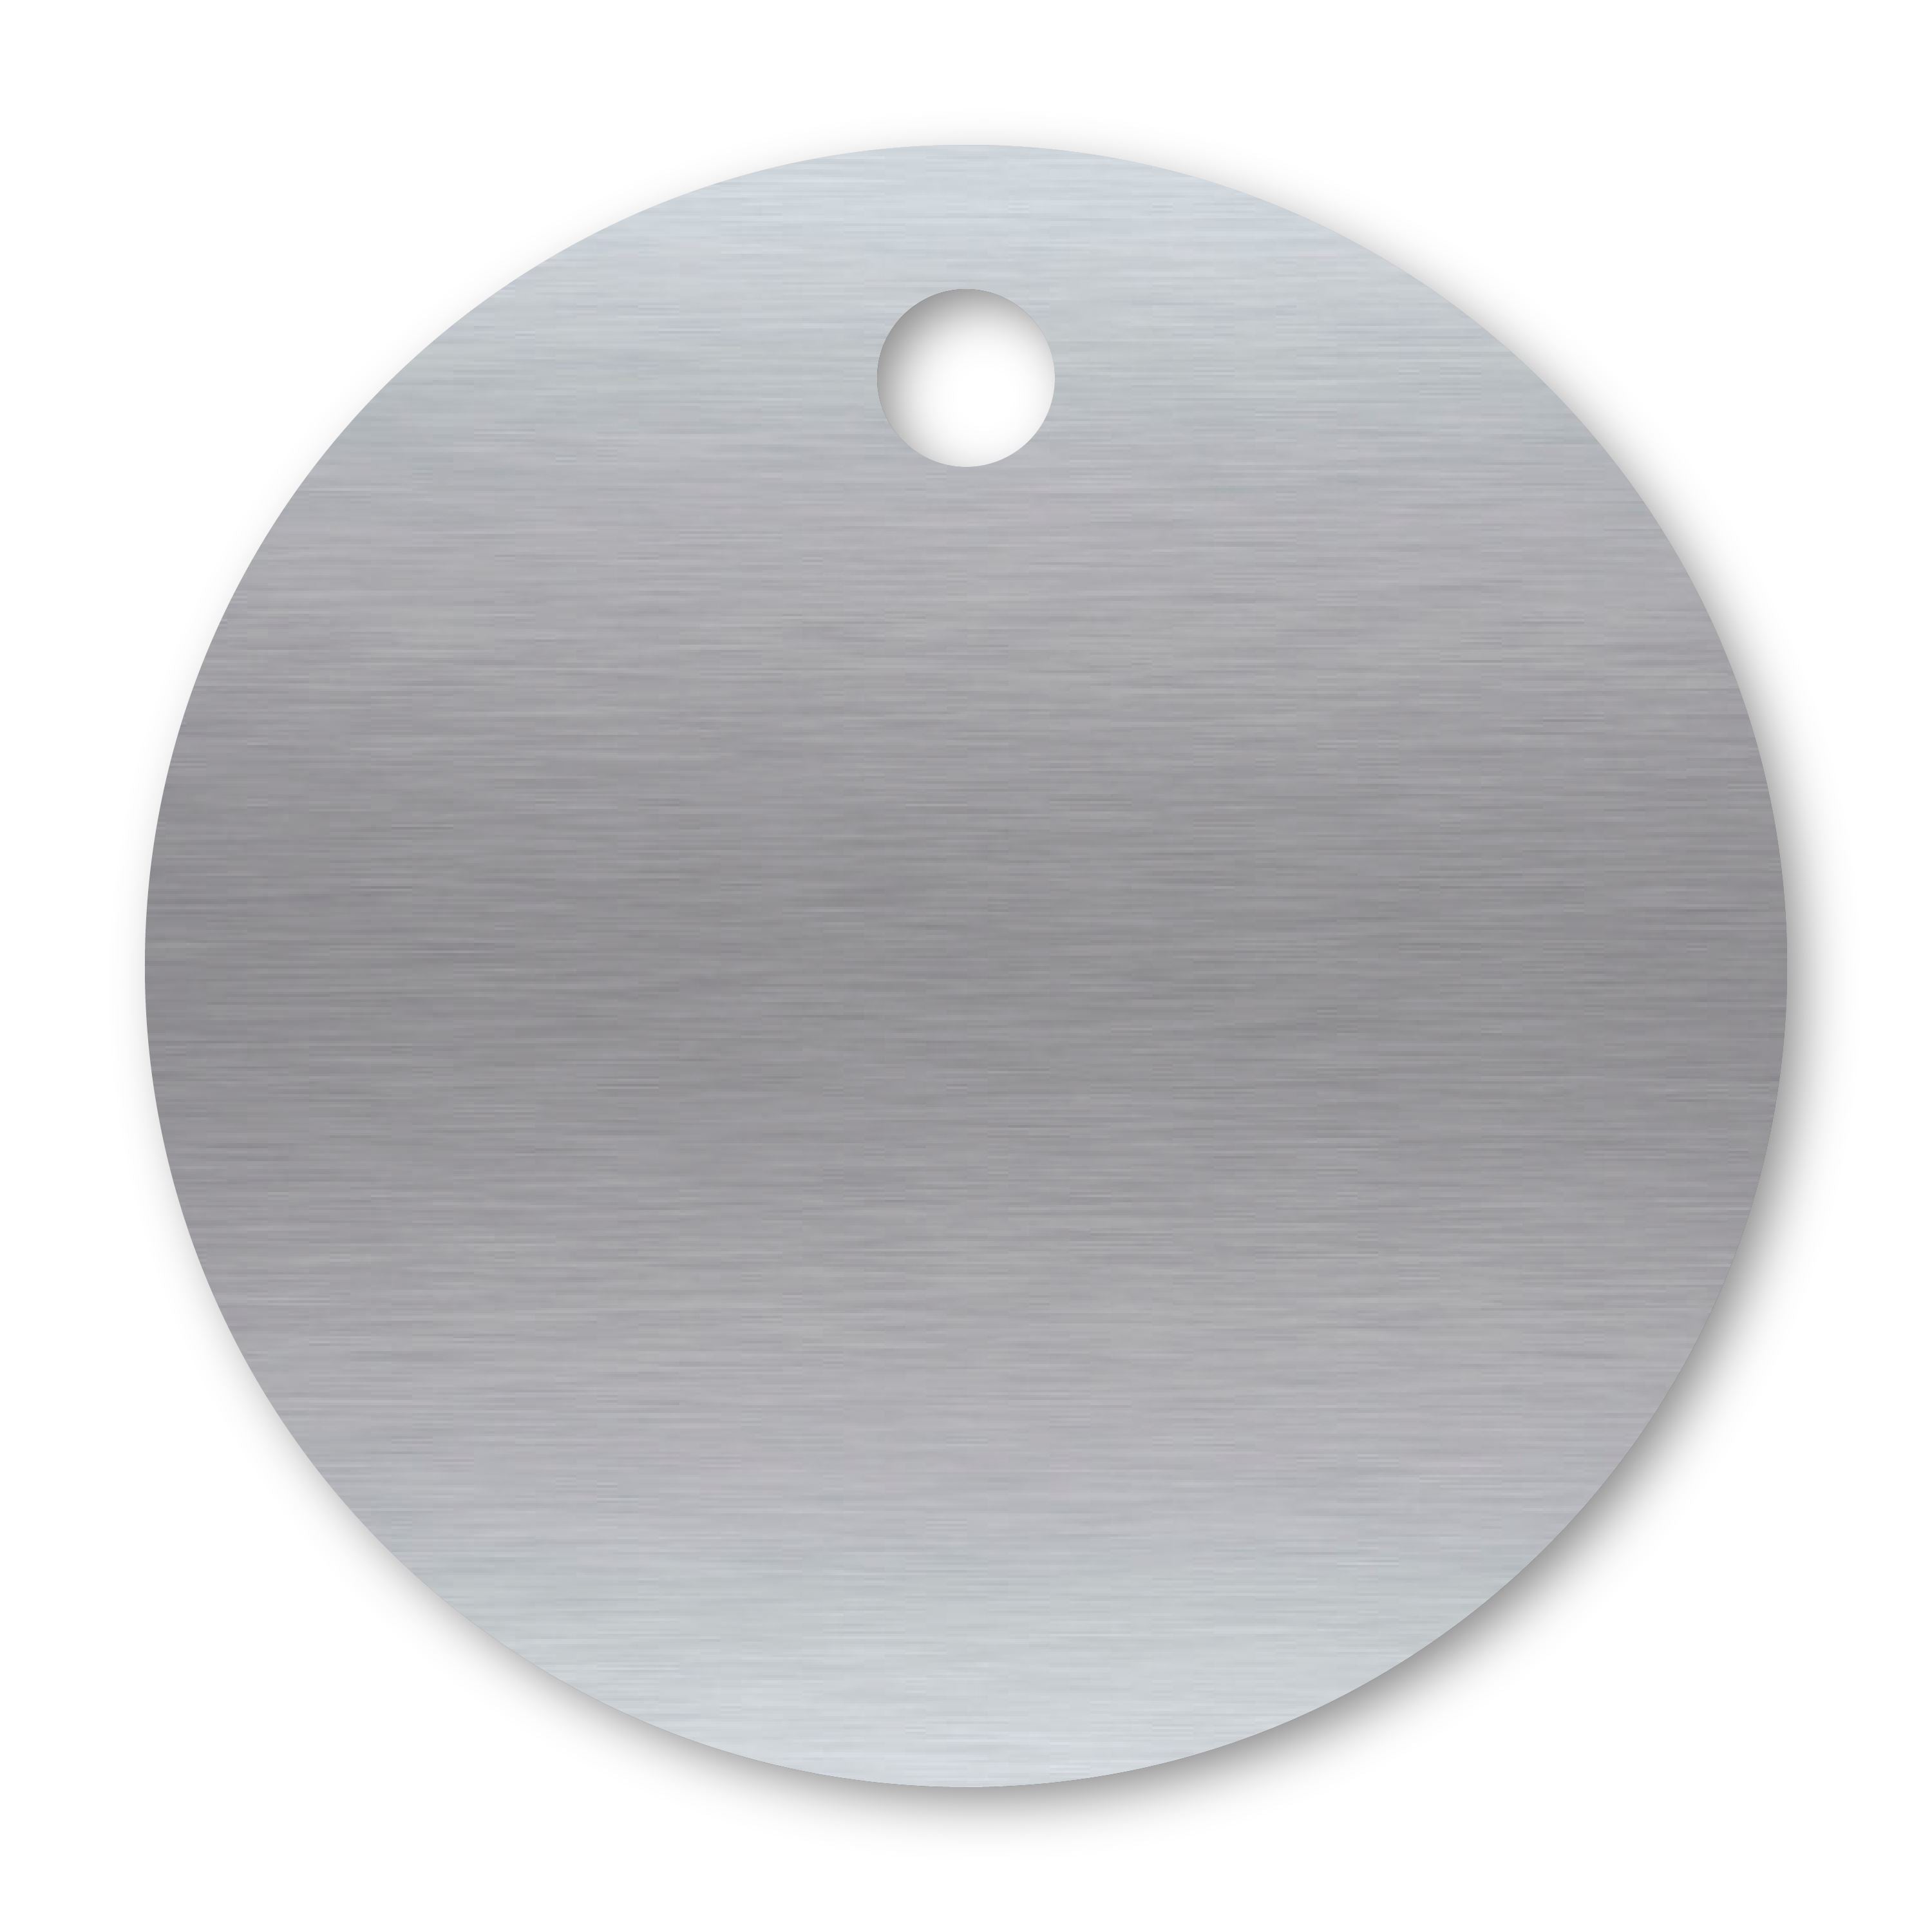 Anodized Aluminum Round Tags, 1" with 1/8" Hole, Laser Engraved Metal Tags Craftworks NW Silver 